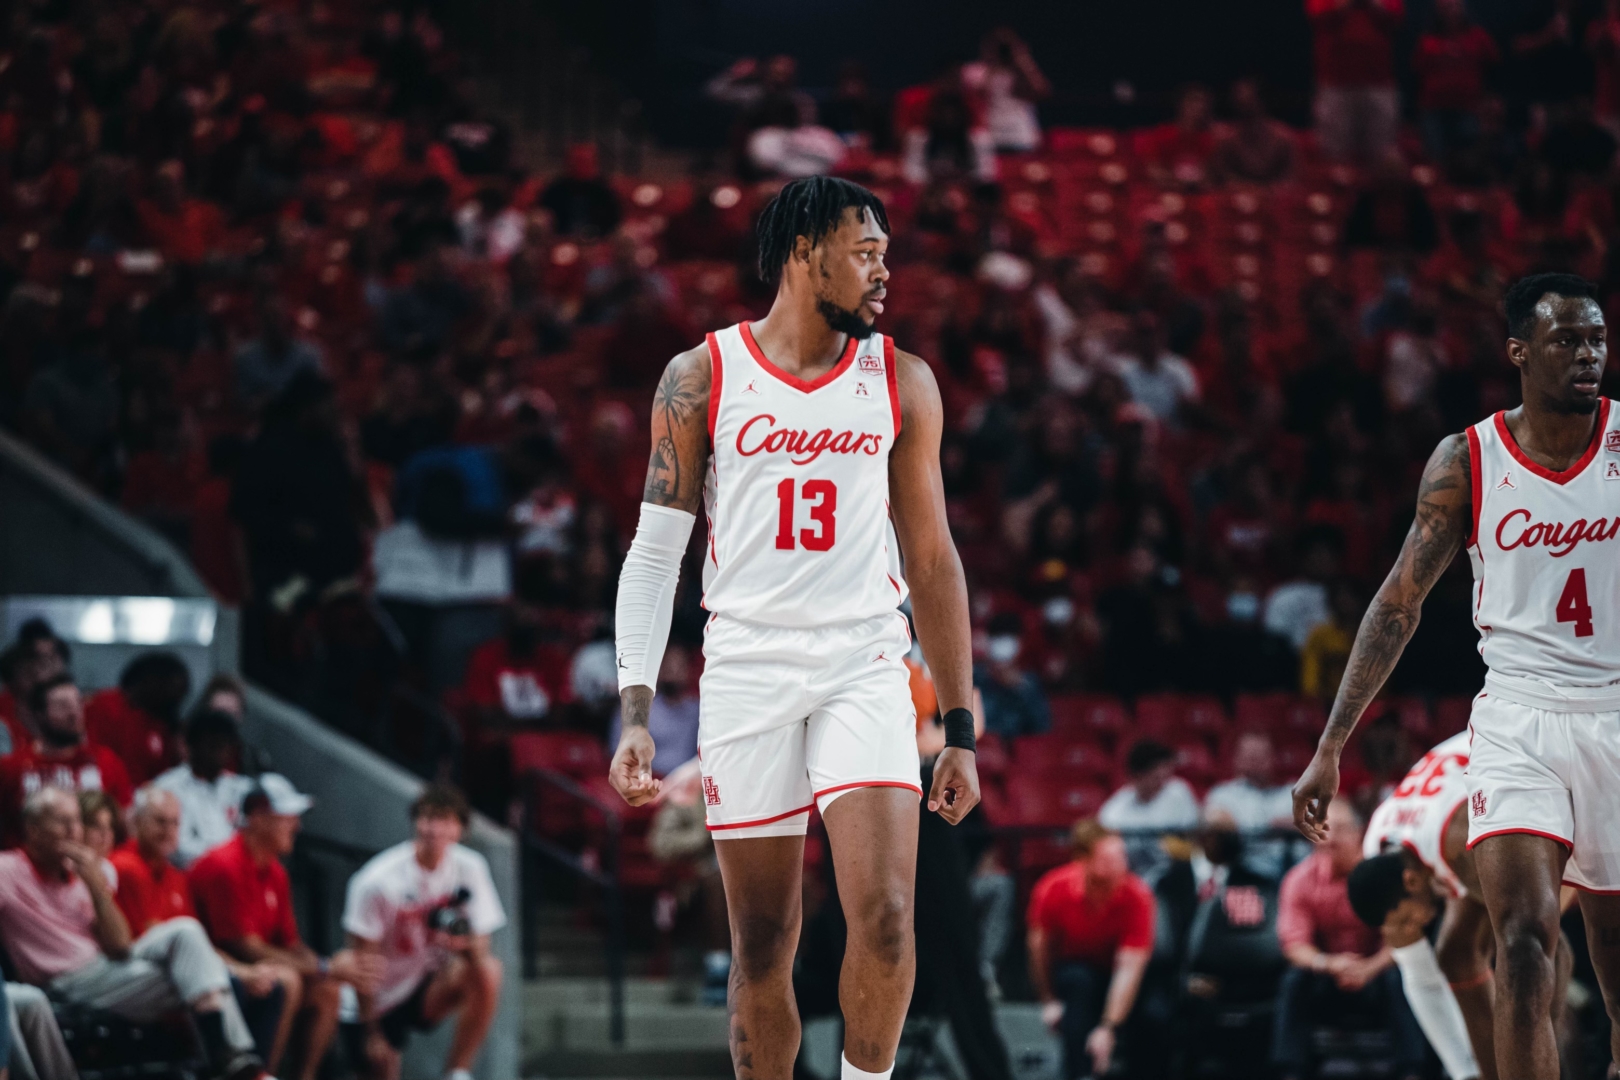 Kelvin Sampson said forward J'Wan Roberts, who flirted with a double-double on Tuesday night pulling down 15 boards to go along with eight points, was the reason UH defeated Hofstra in its season-opener. | James Schillinger/The Cougar